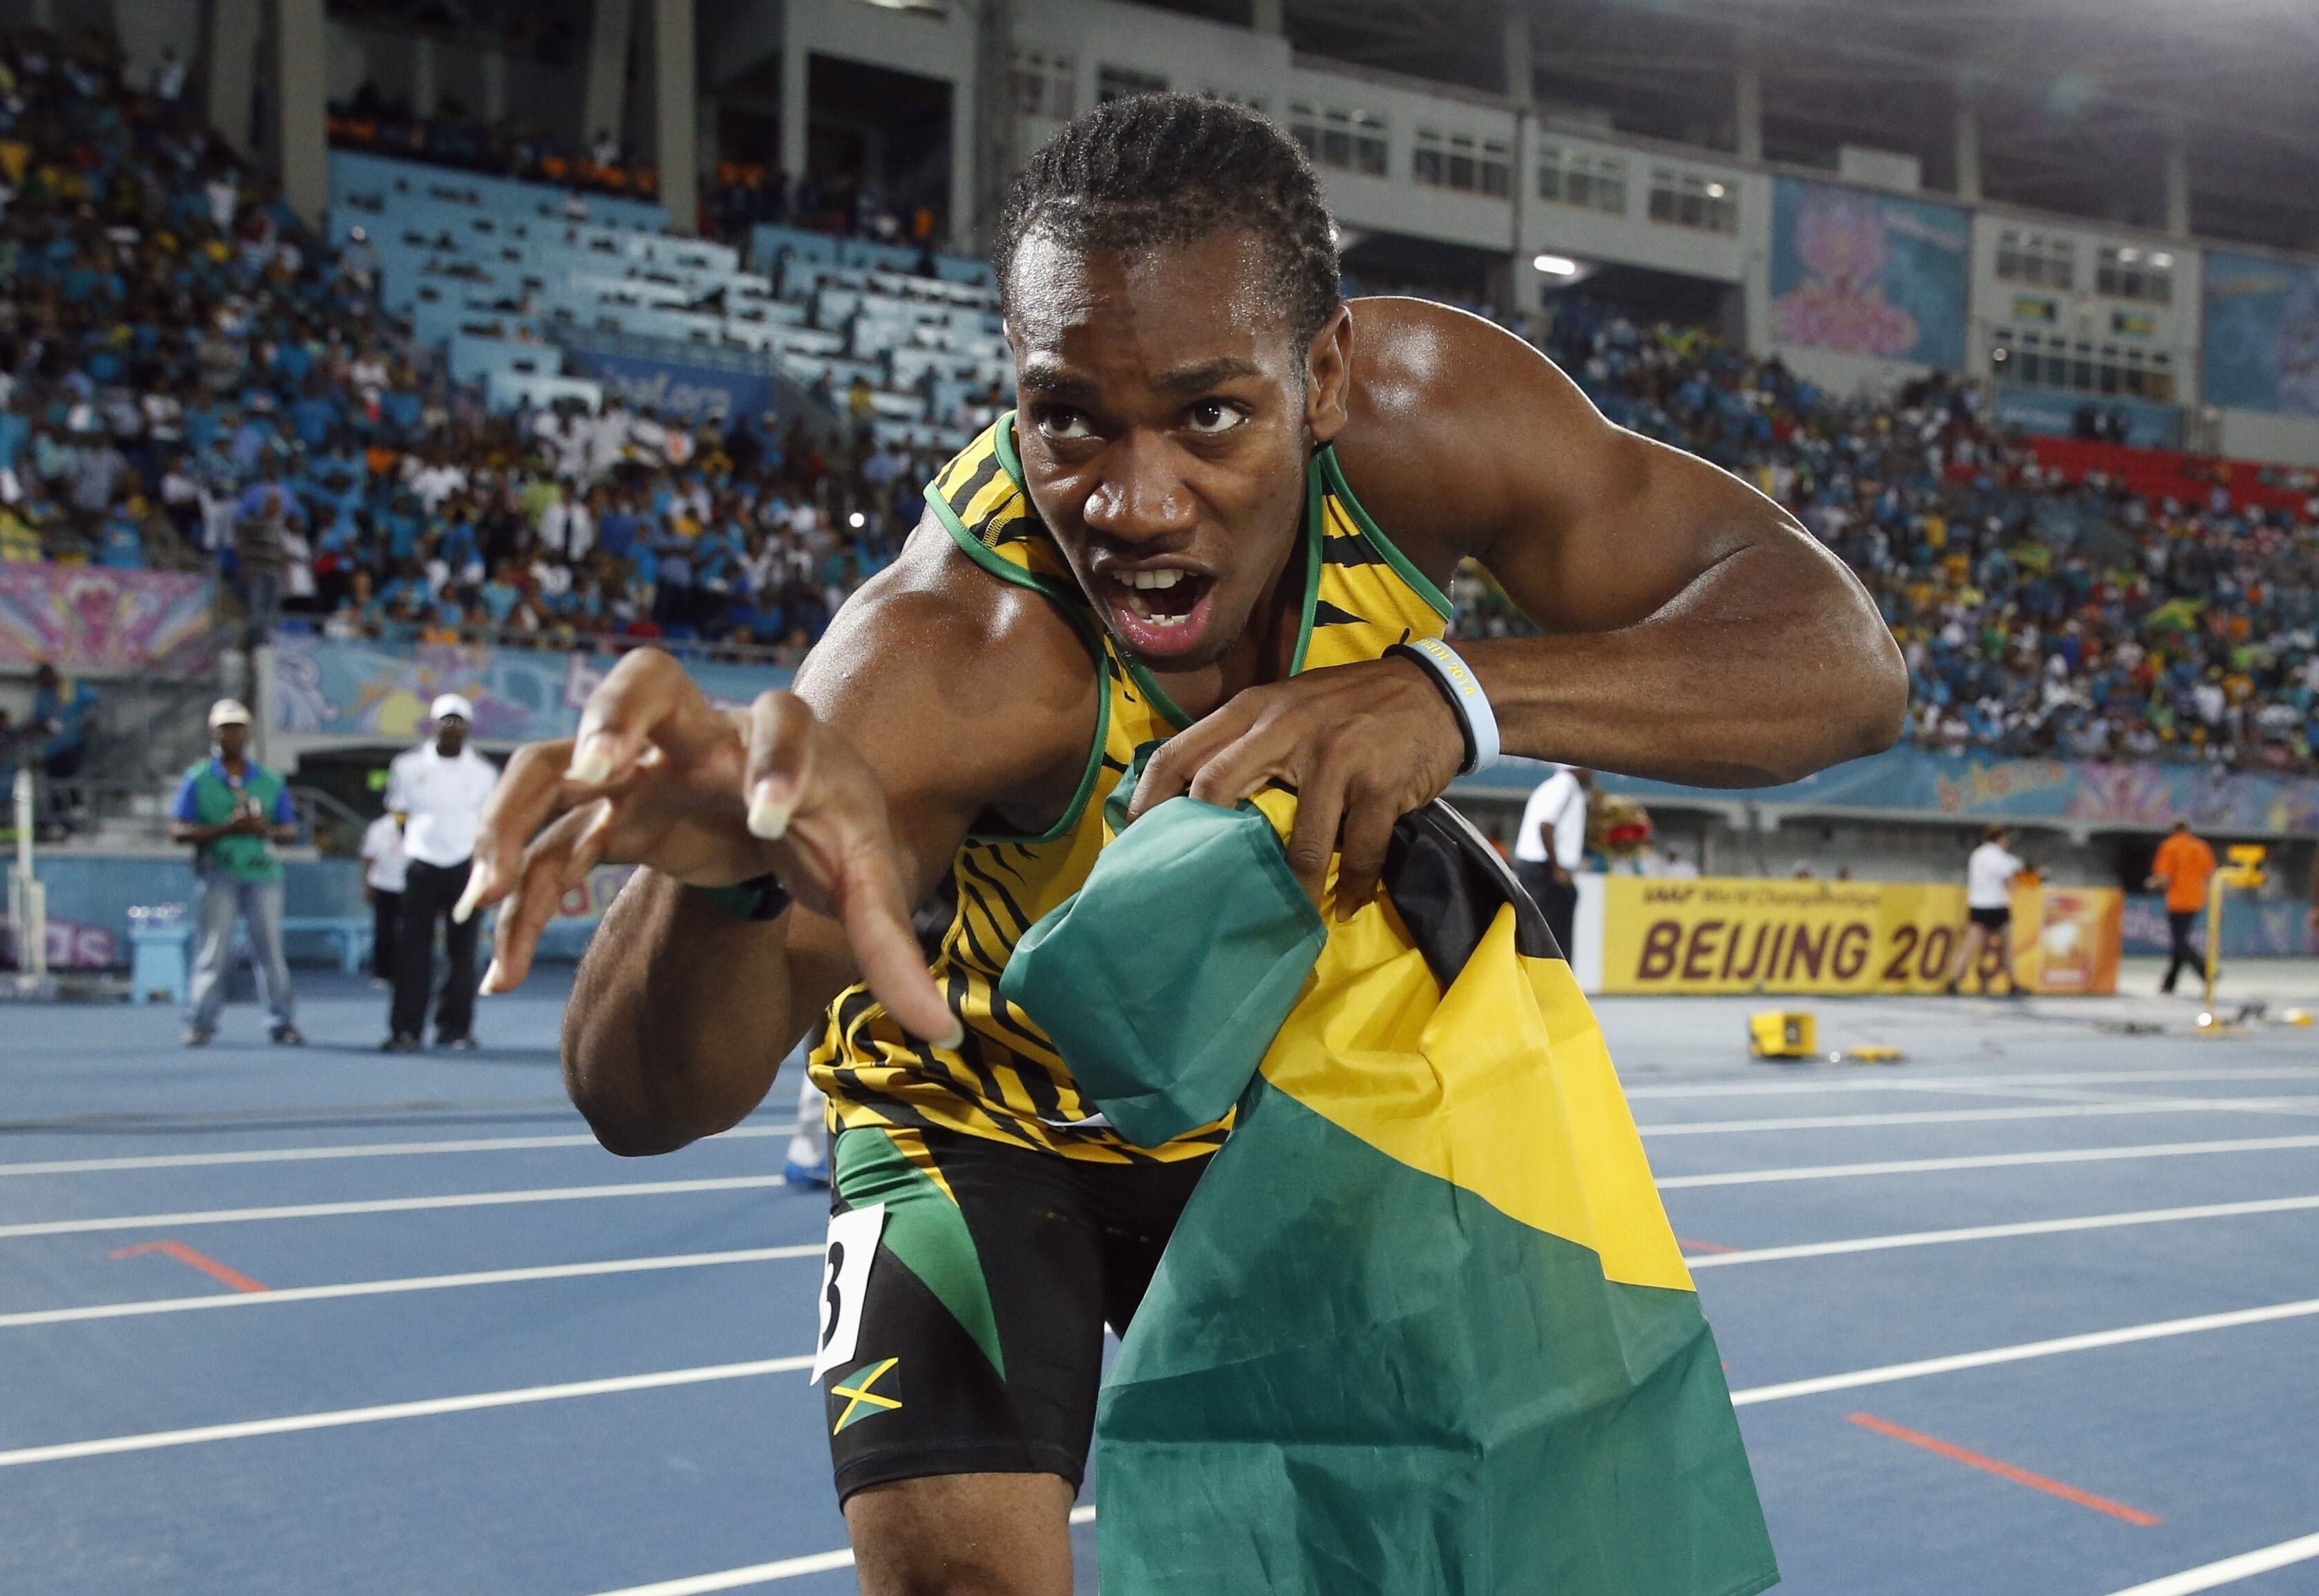 Jamaica's Yohan Blake after their men’s team set a new world record in the 4x200m relay at the IAAF World Relays Championships in Nassau, the Bahamas in 2014. Photo: Reuters